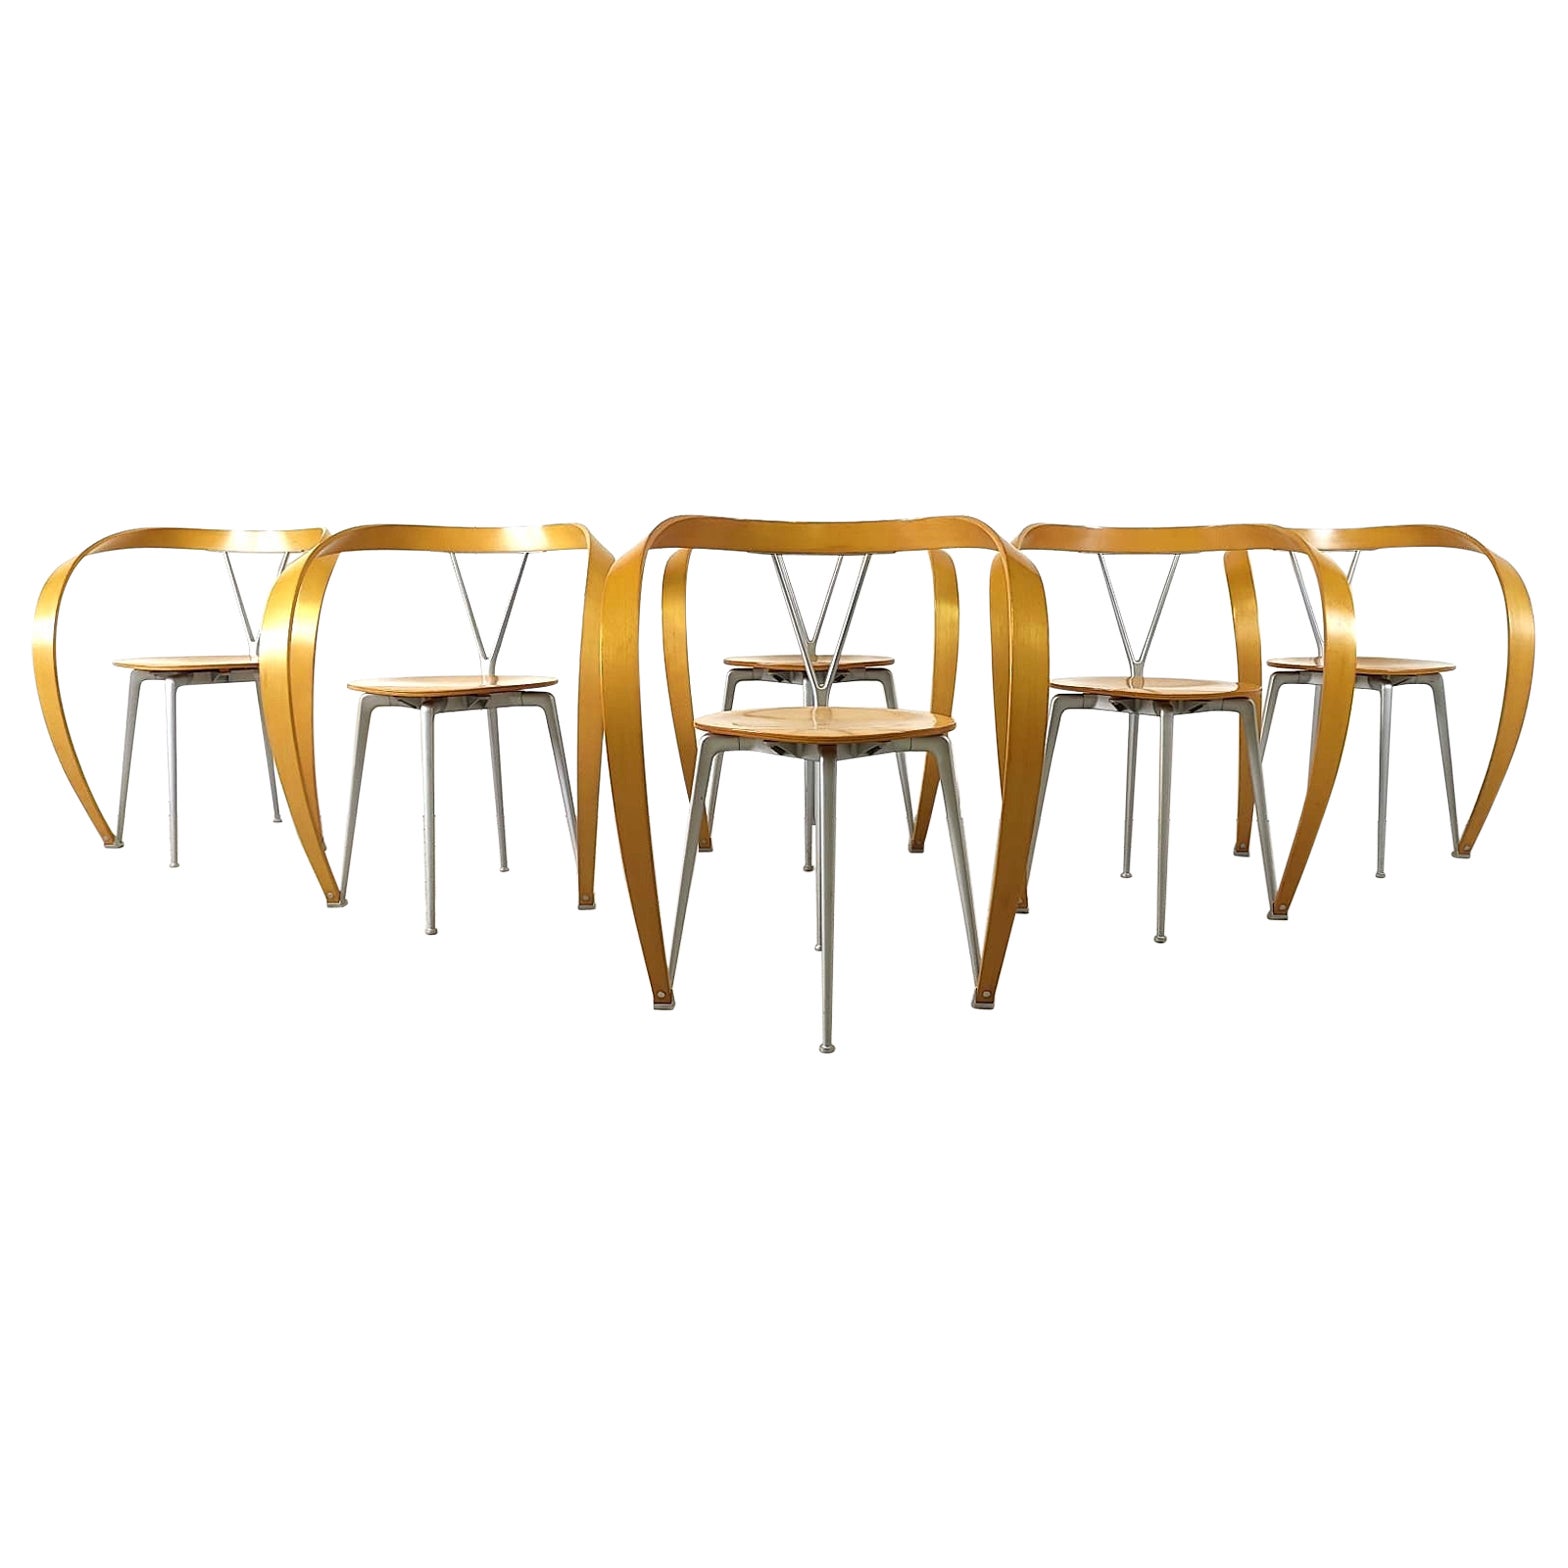 Revers Dining Chairs by Andrea Branzi for Cassina, 1993, Set of 6